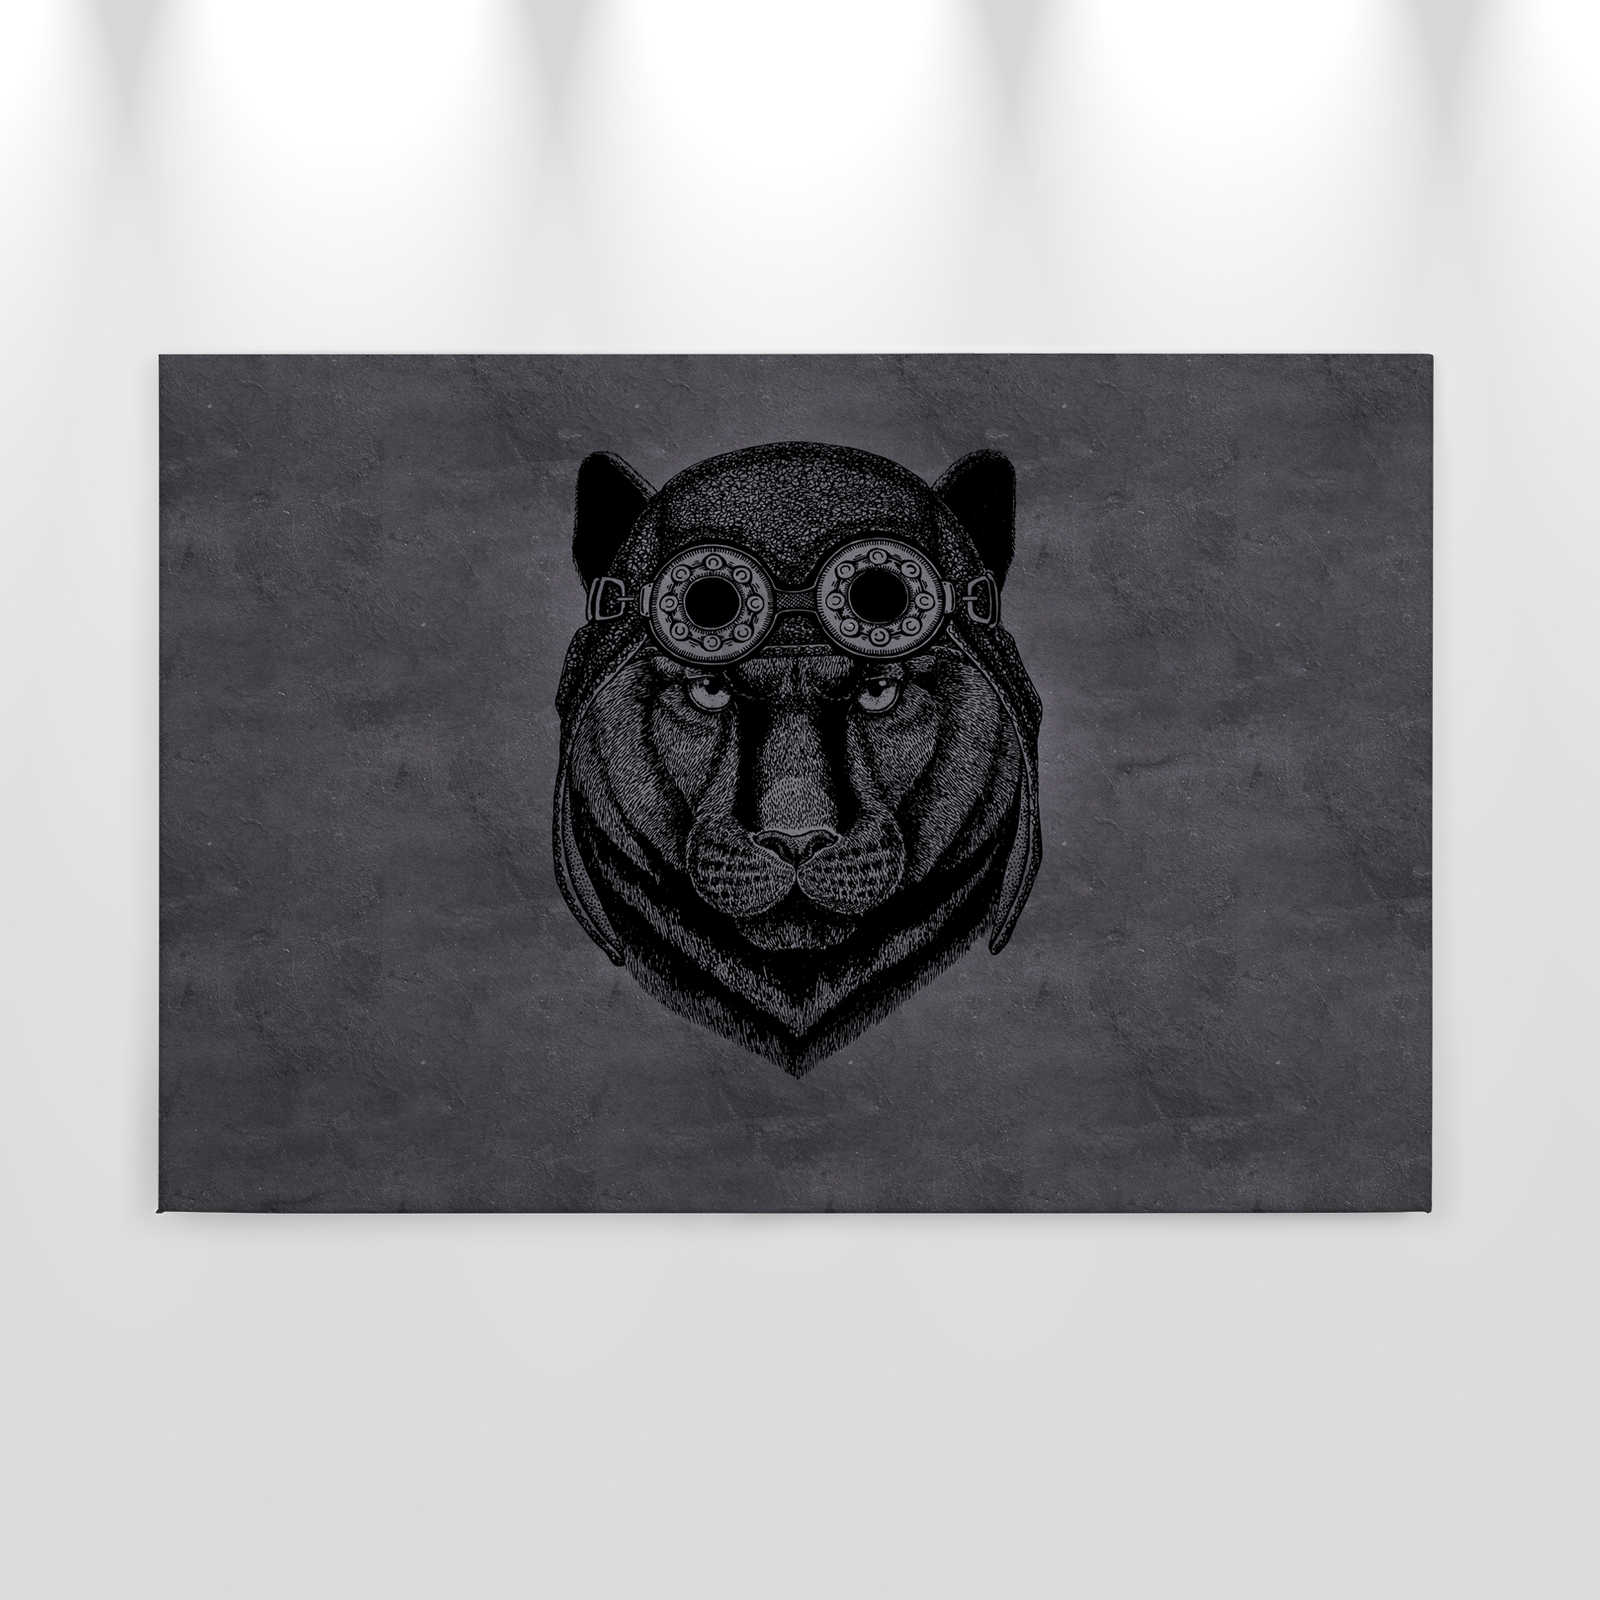             Black Canvas Painting Panther with Aviator Cap - 0.90 m x 0.60 m
        